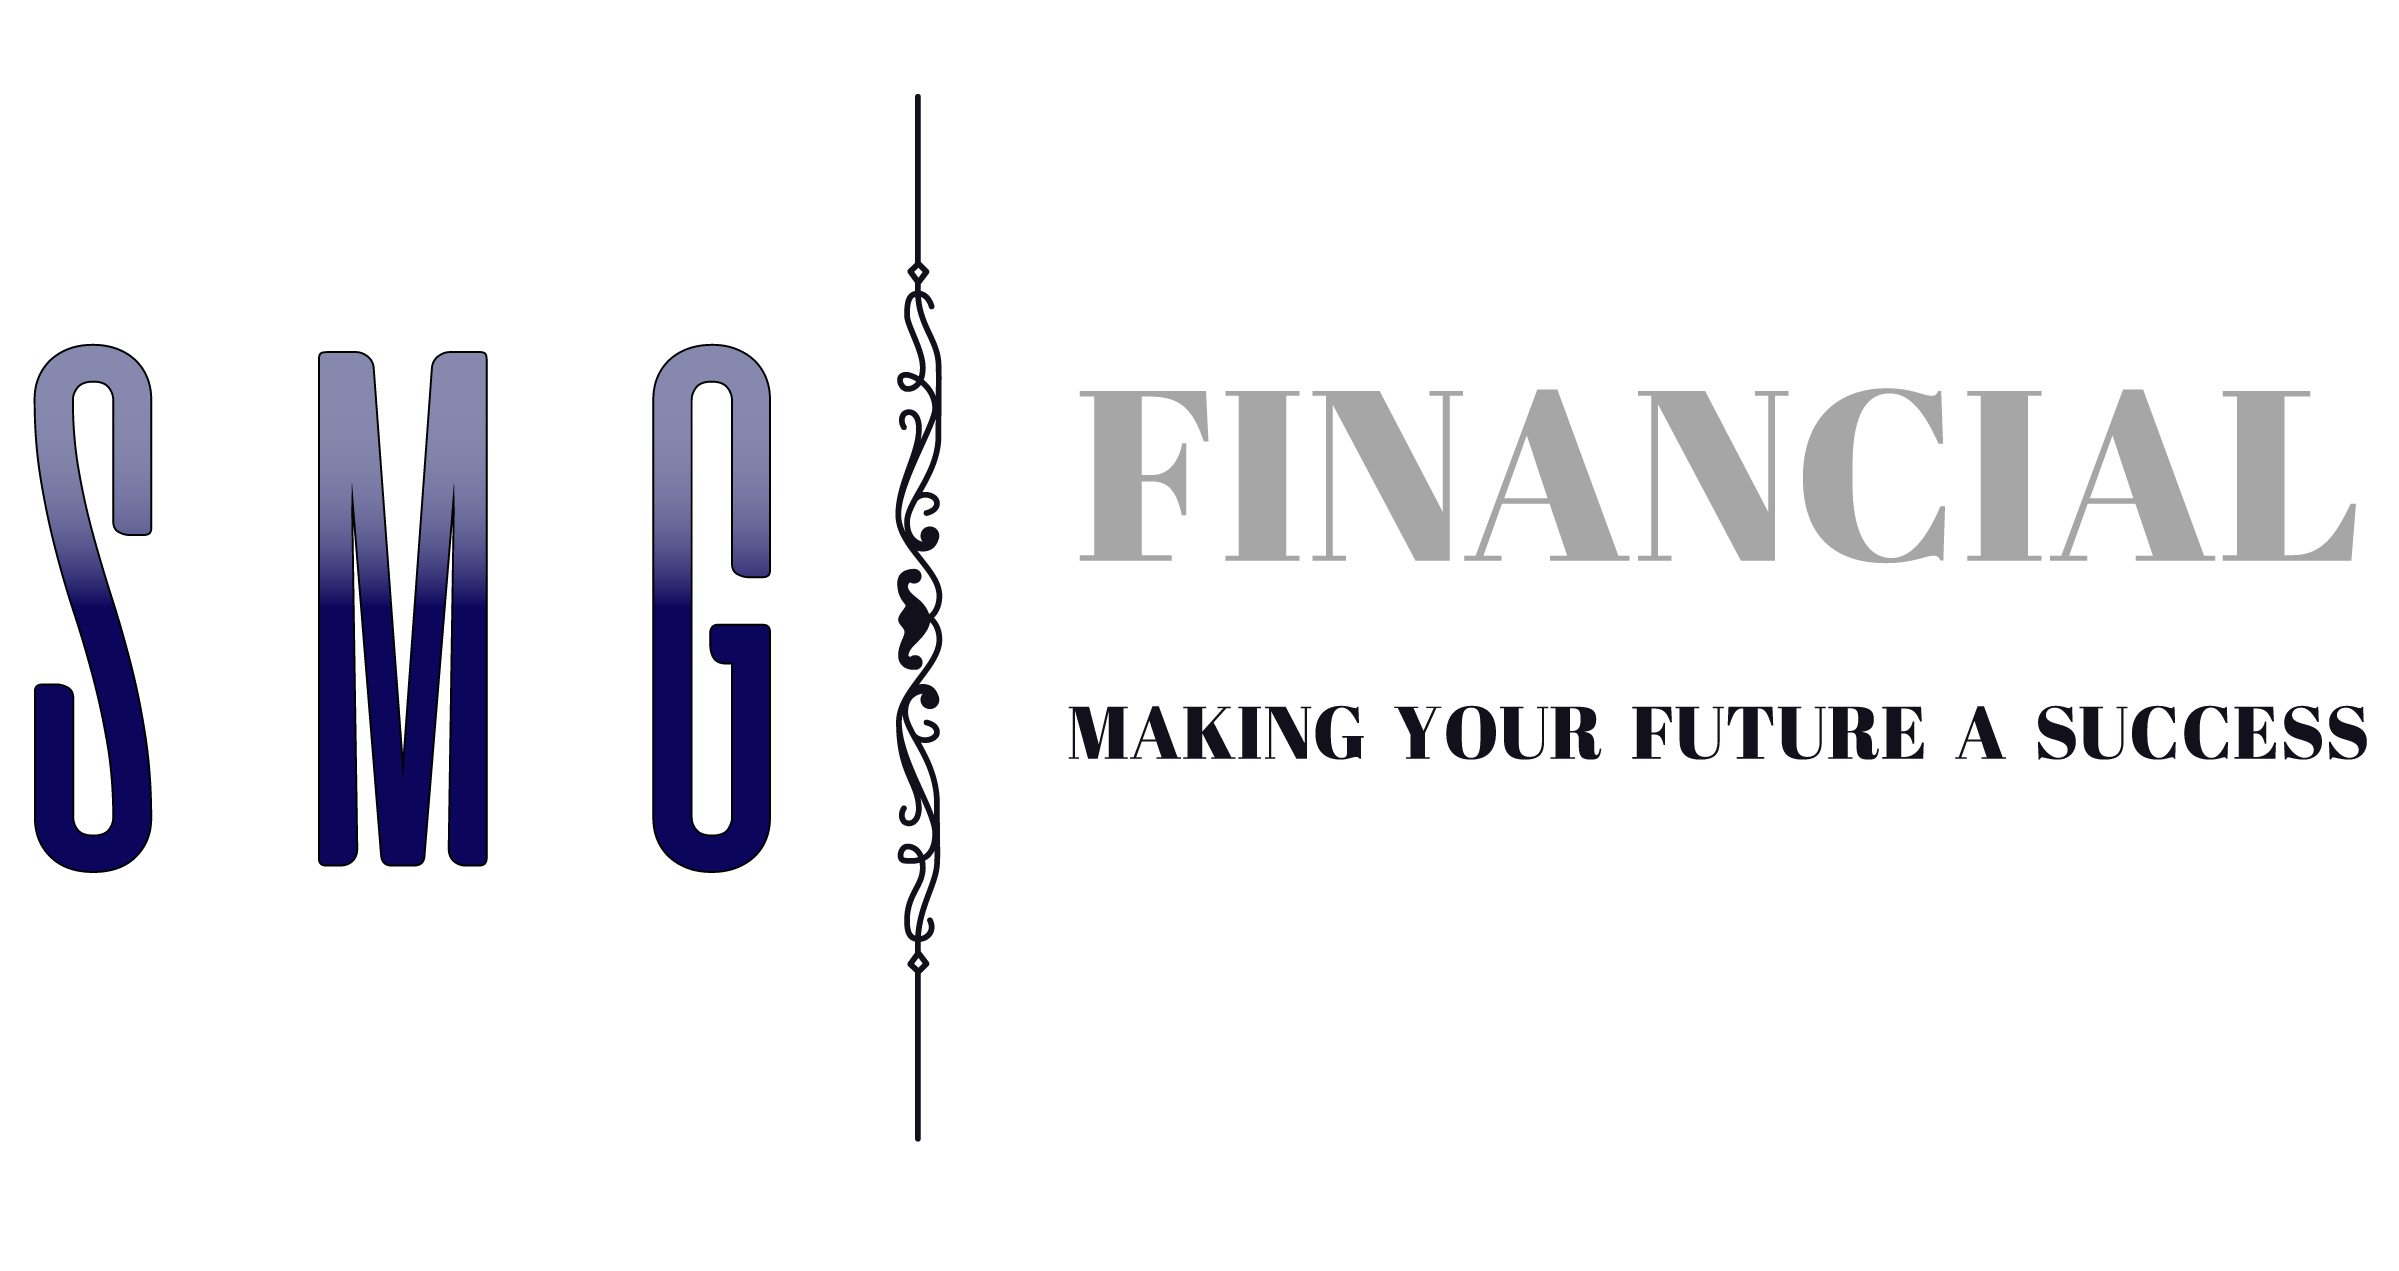 SMG Financial